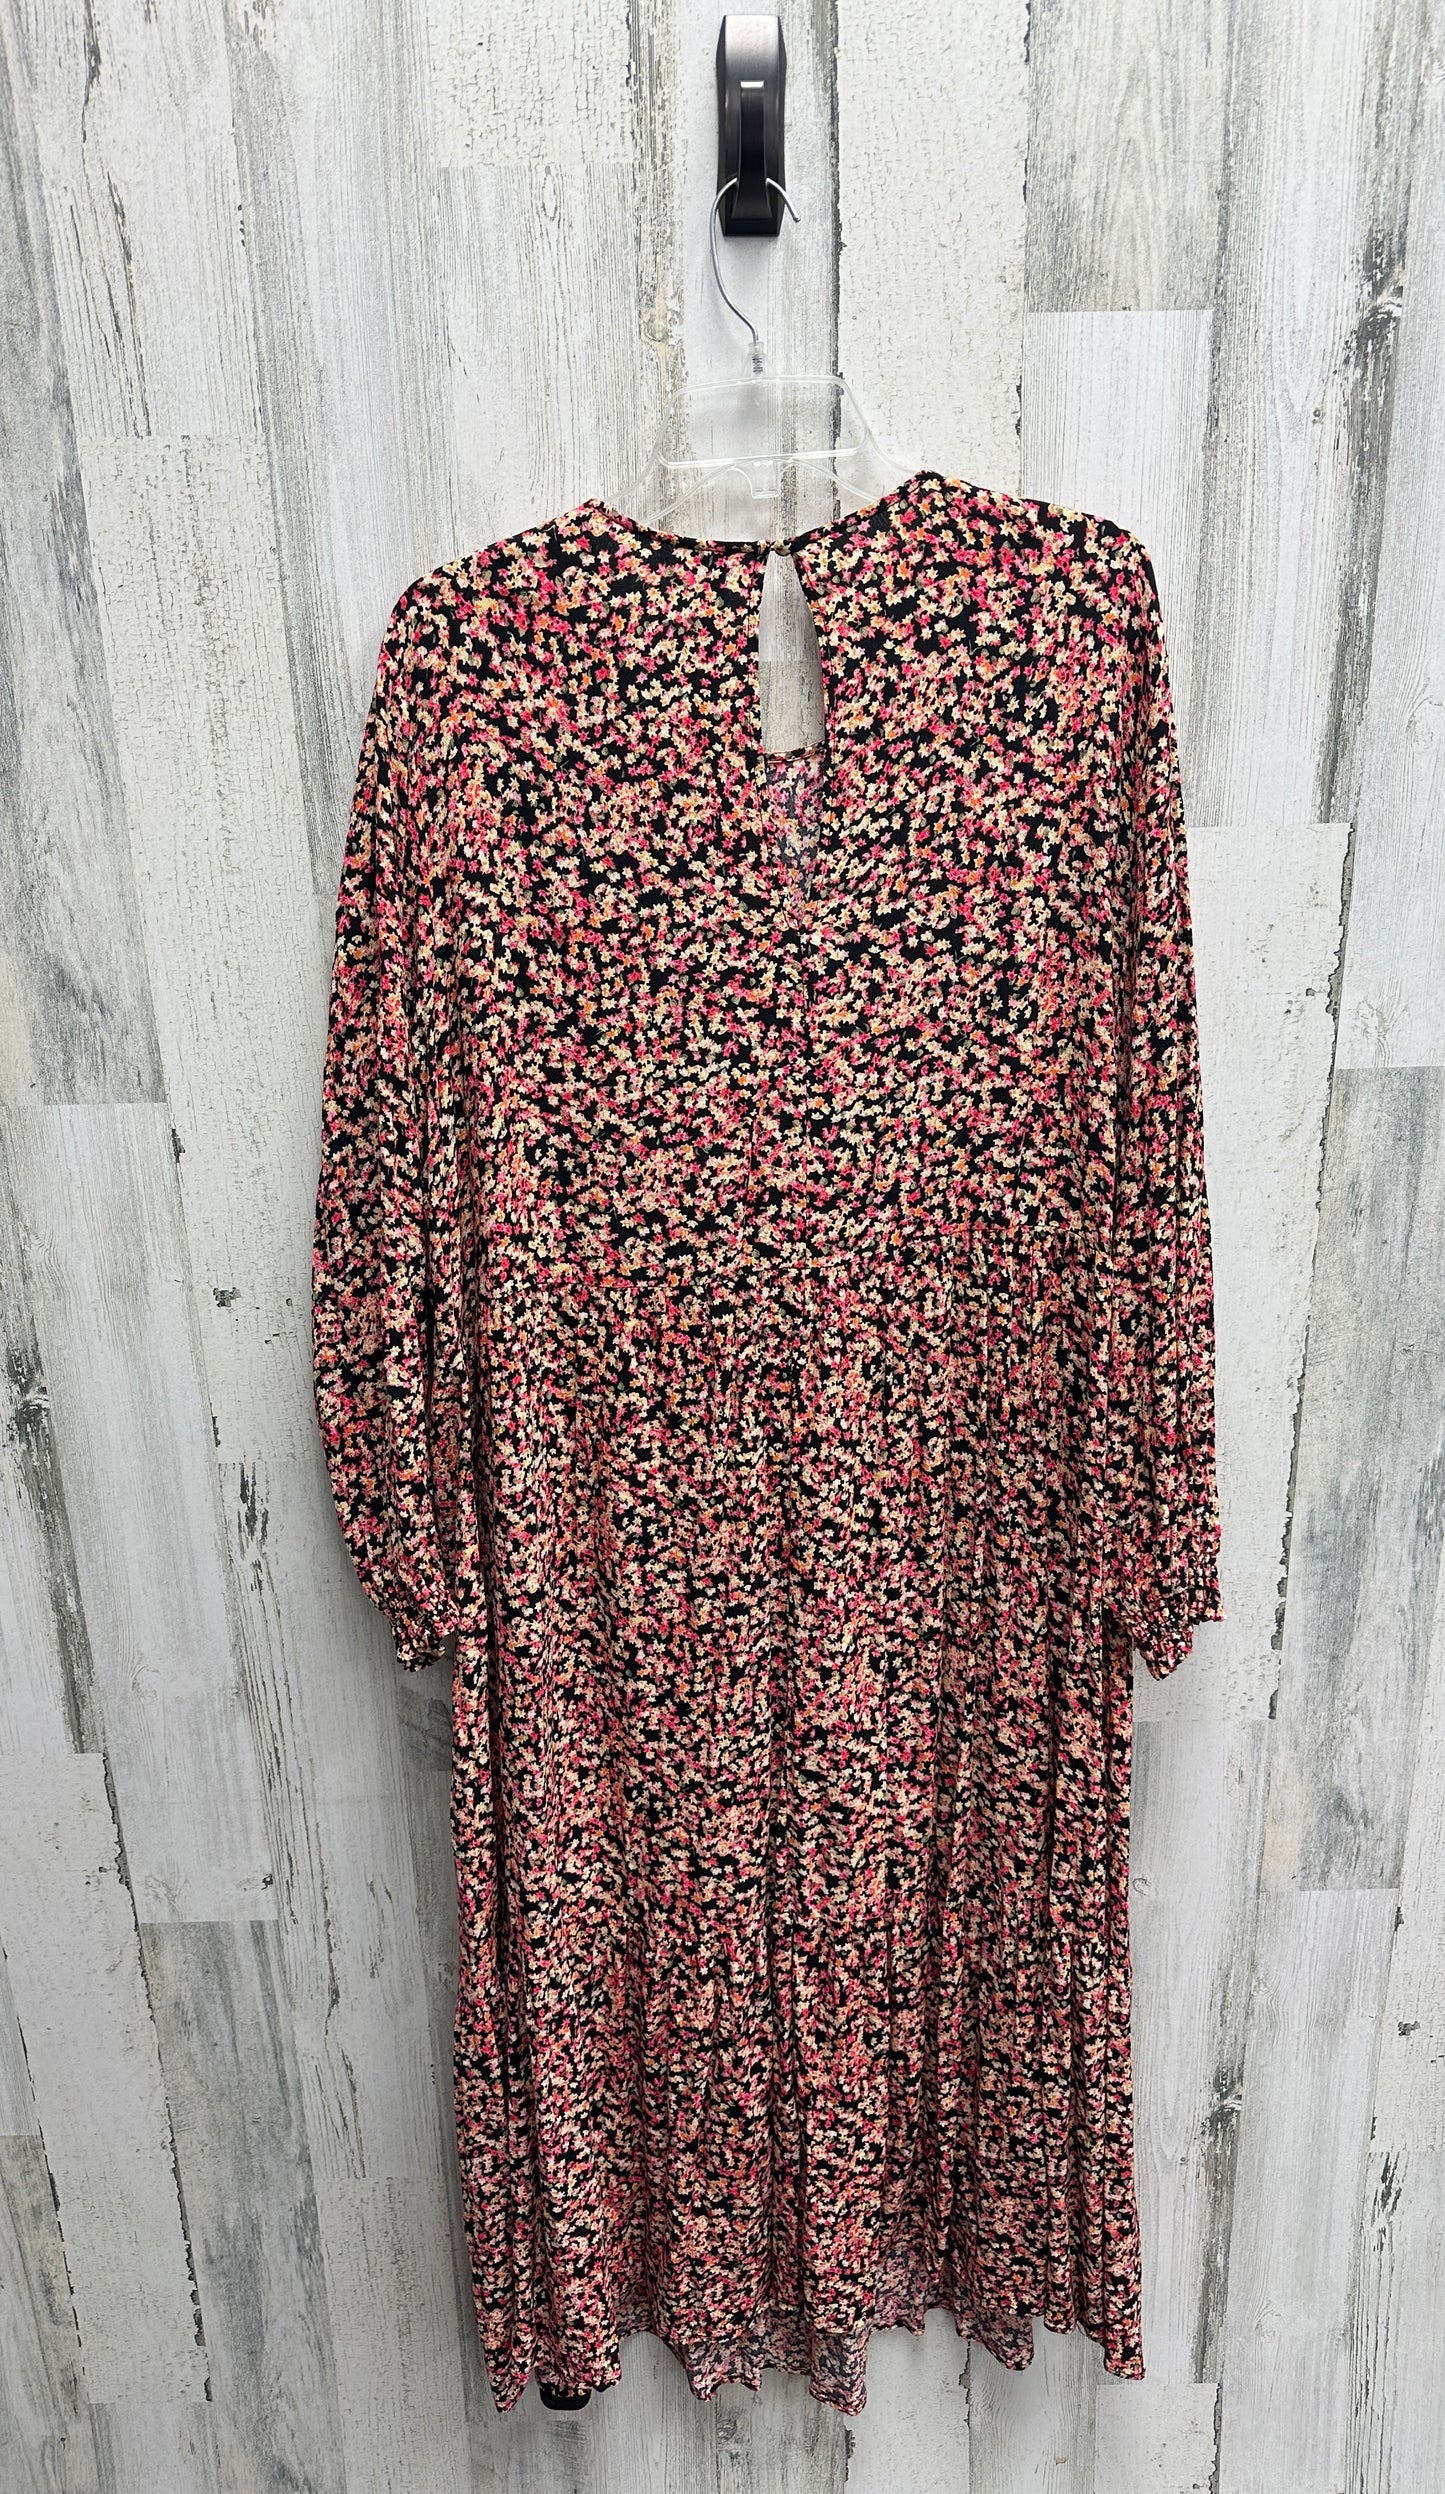 Dress Casual Maxi By H&m  Size: Xl